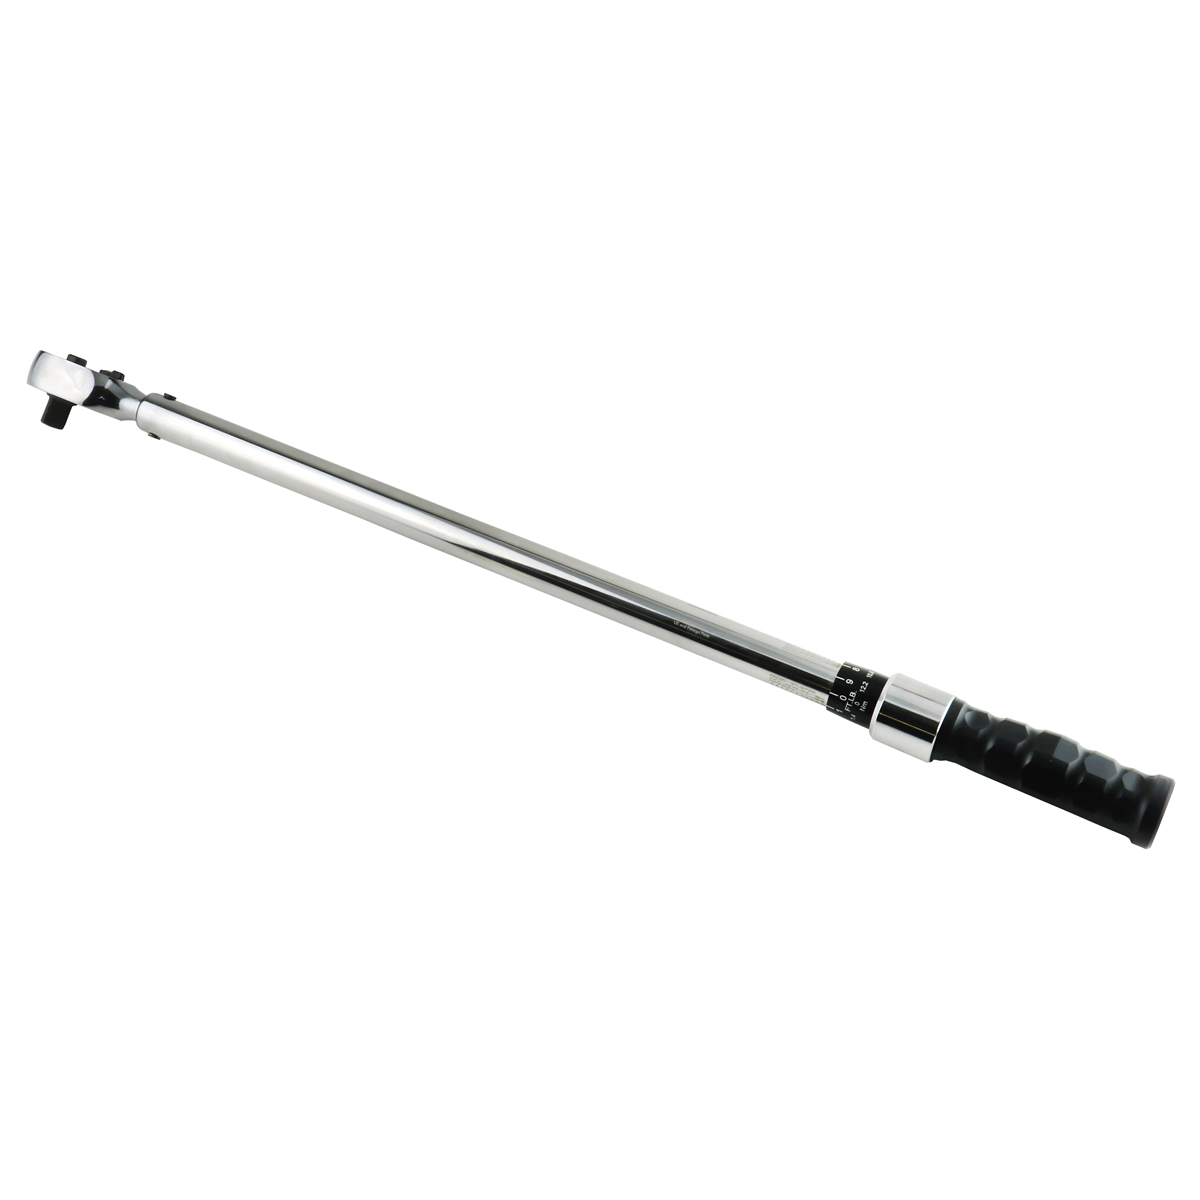 1/2" Drive Adjustable Ratcheting 24.5" Torque Wrench, 30-250 ft/